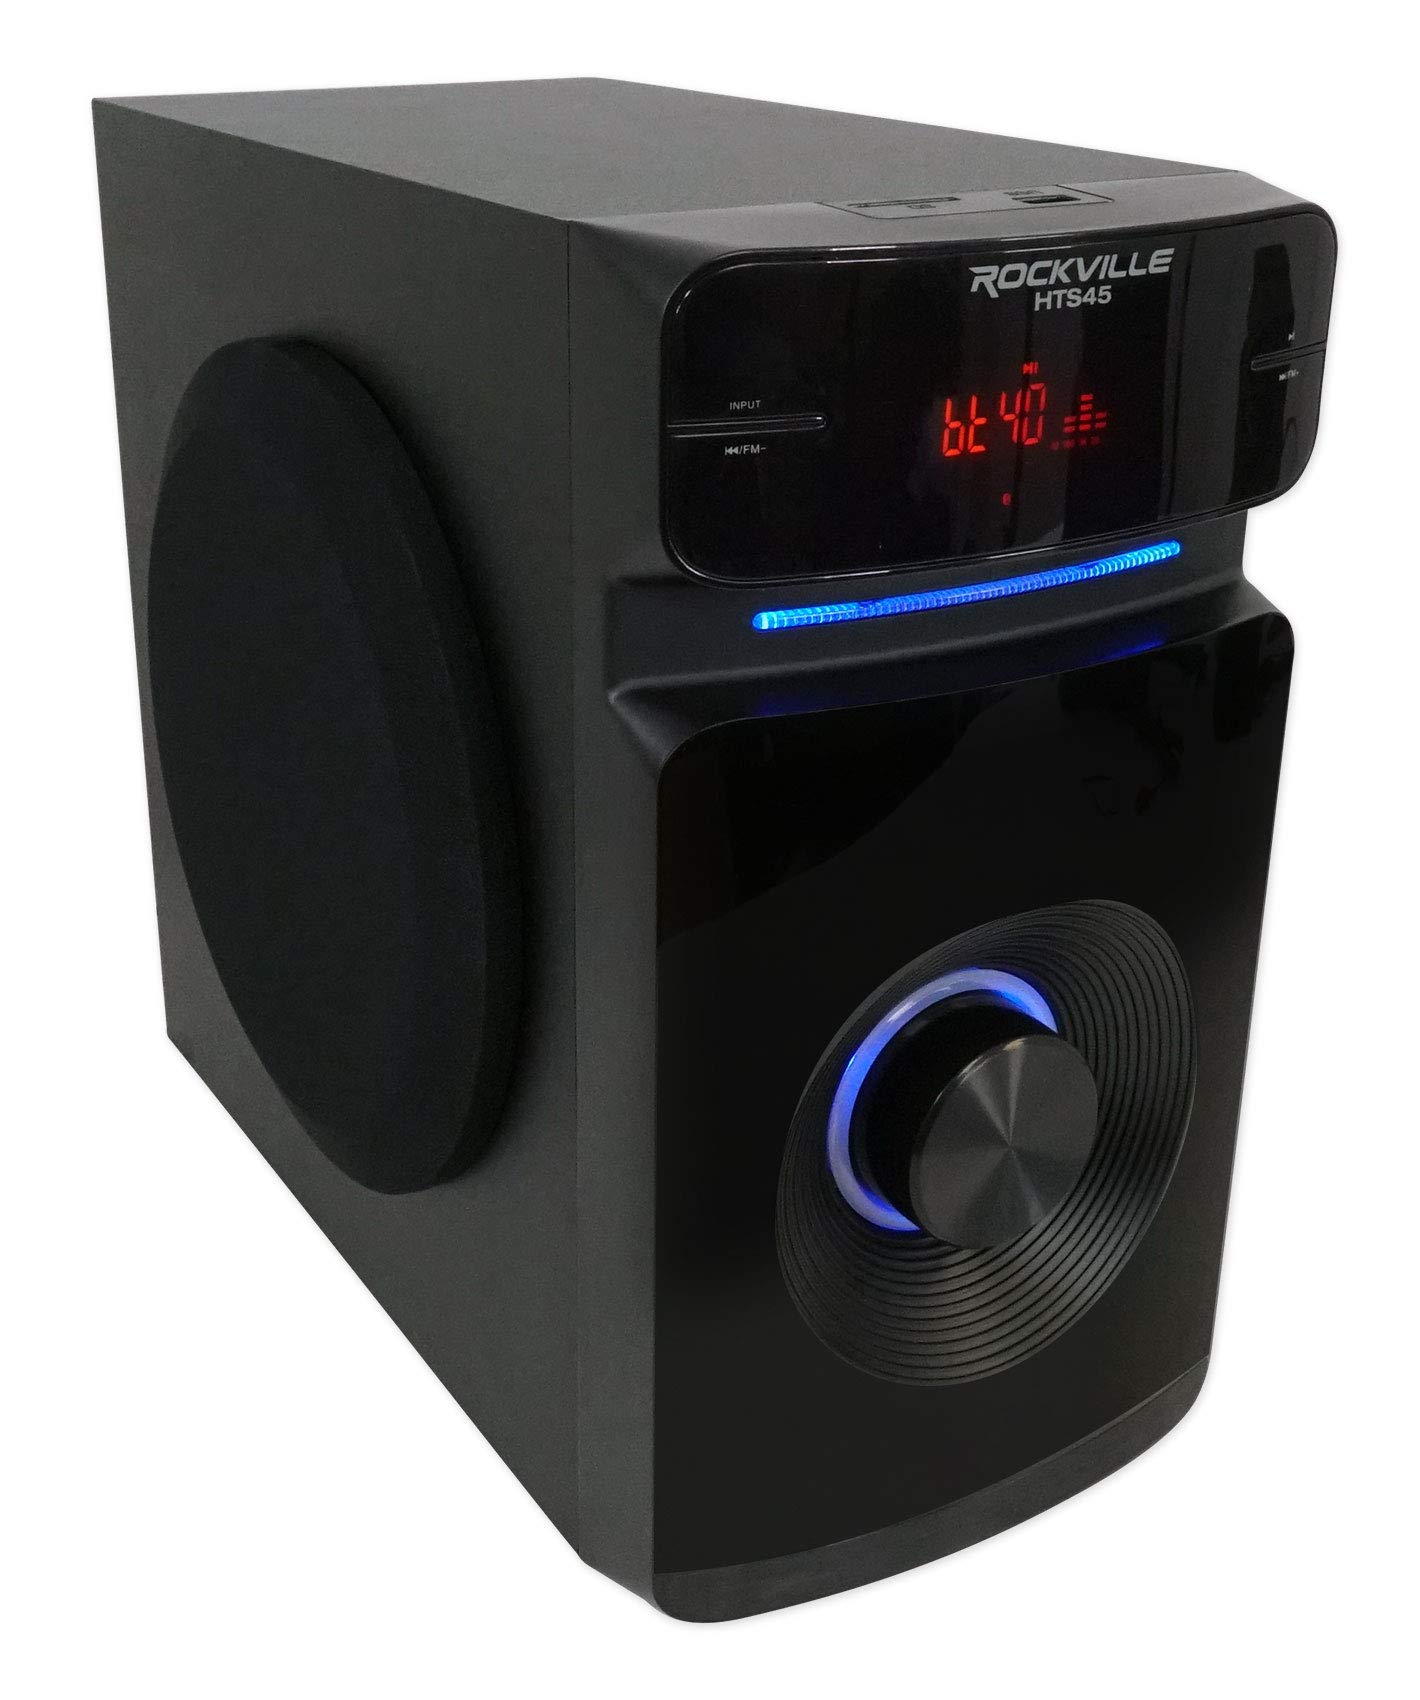 Rockville HTS45 800w 5.1 Channel Bluetooth Home Theater Audio System+Subwoofer, Black